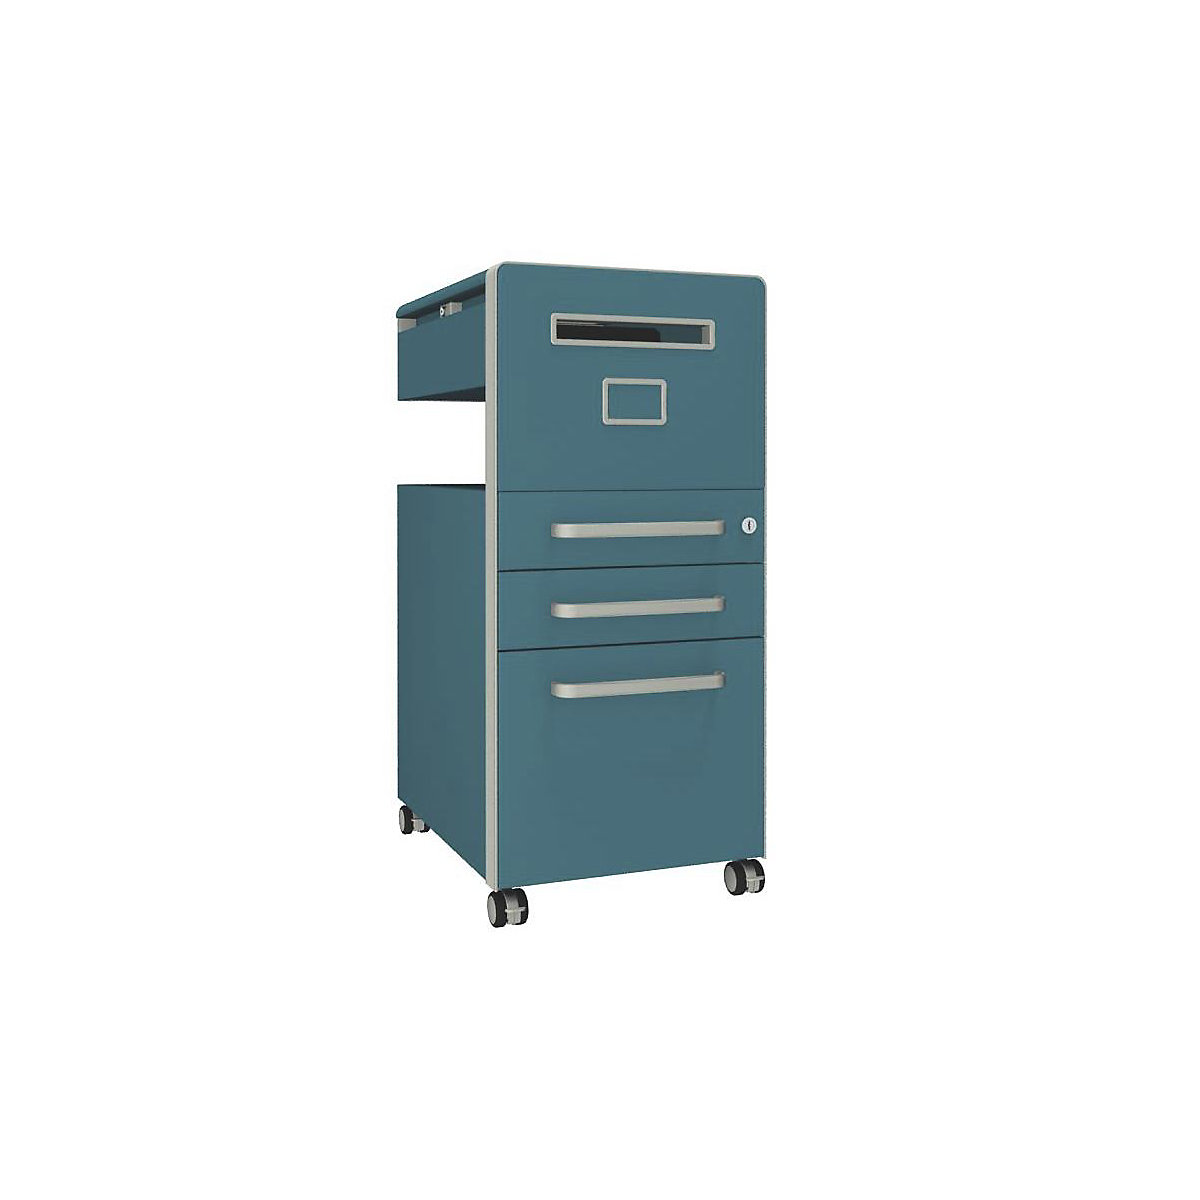 Bite™ pedestal furniture, with 1 whiteboard, opens on the right side – BISLEY, with 2 universal drawers, 1 suspension file drawer, azure-15